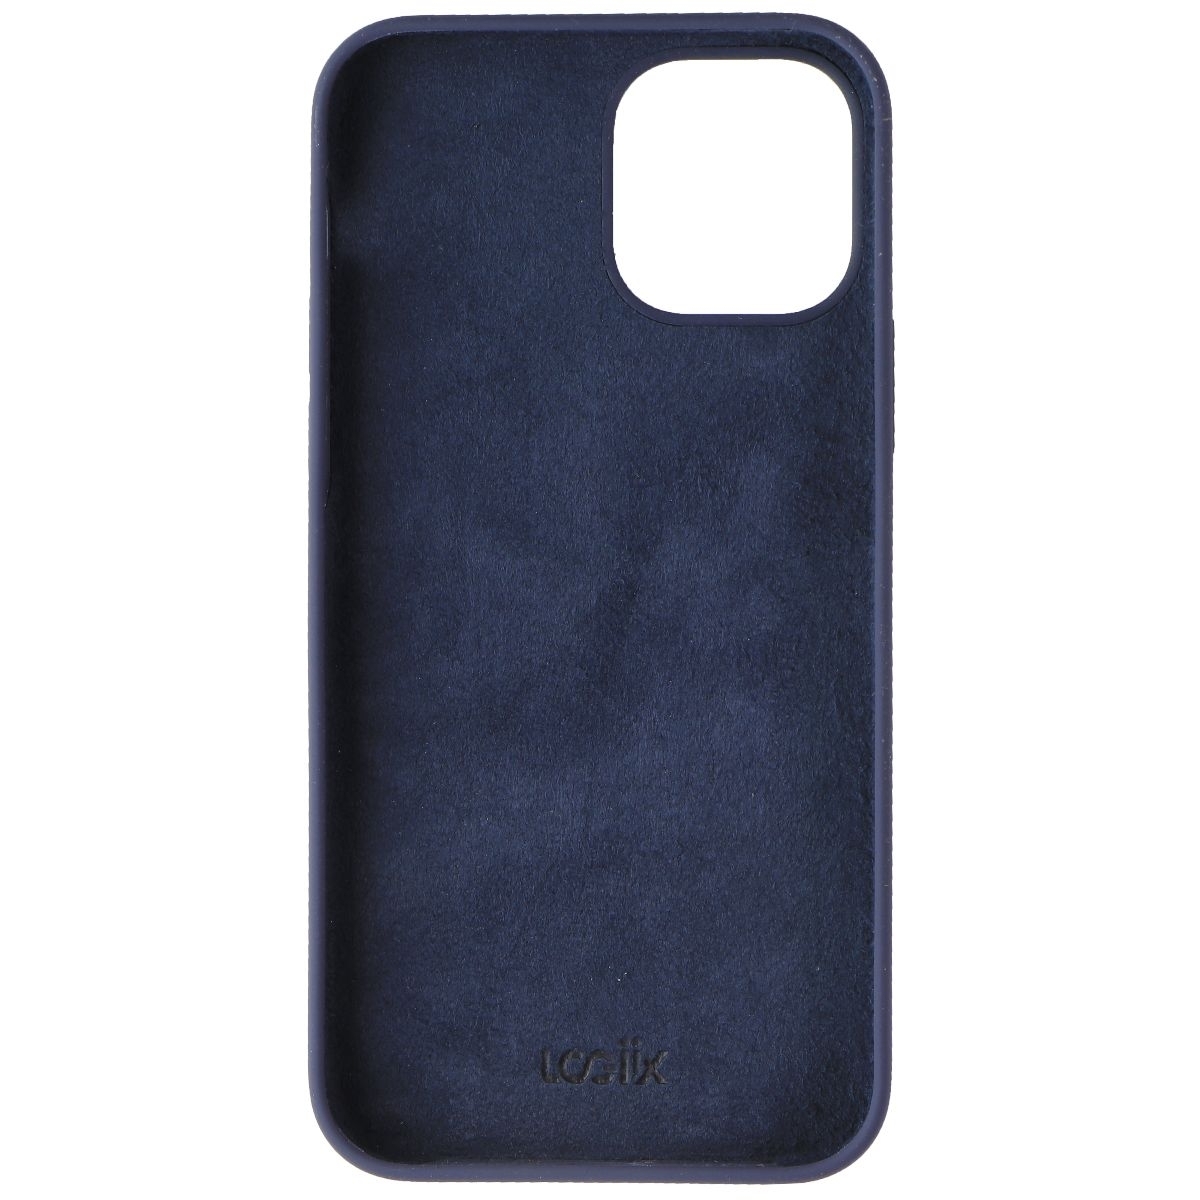 Logiix Silicone Case For Apple IPhone 12 And 12 Pro - Dark Blue (Refurbished)